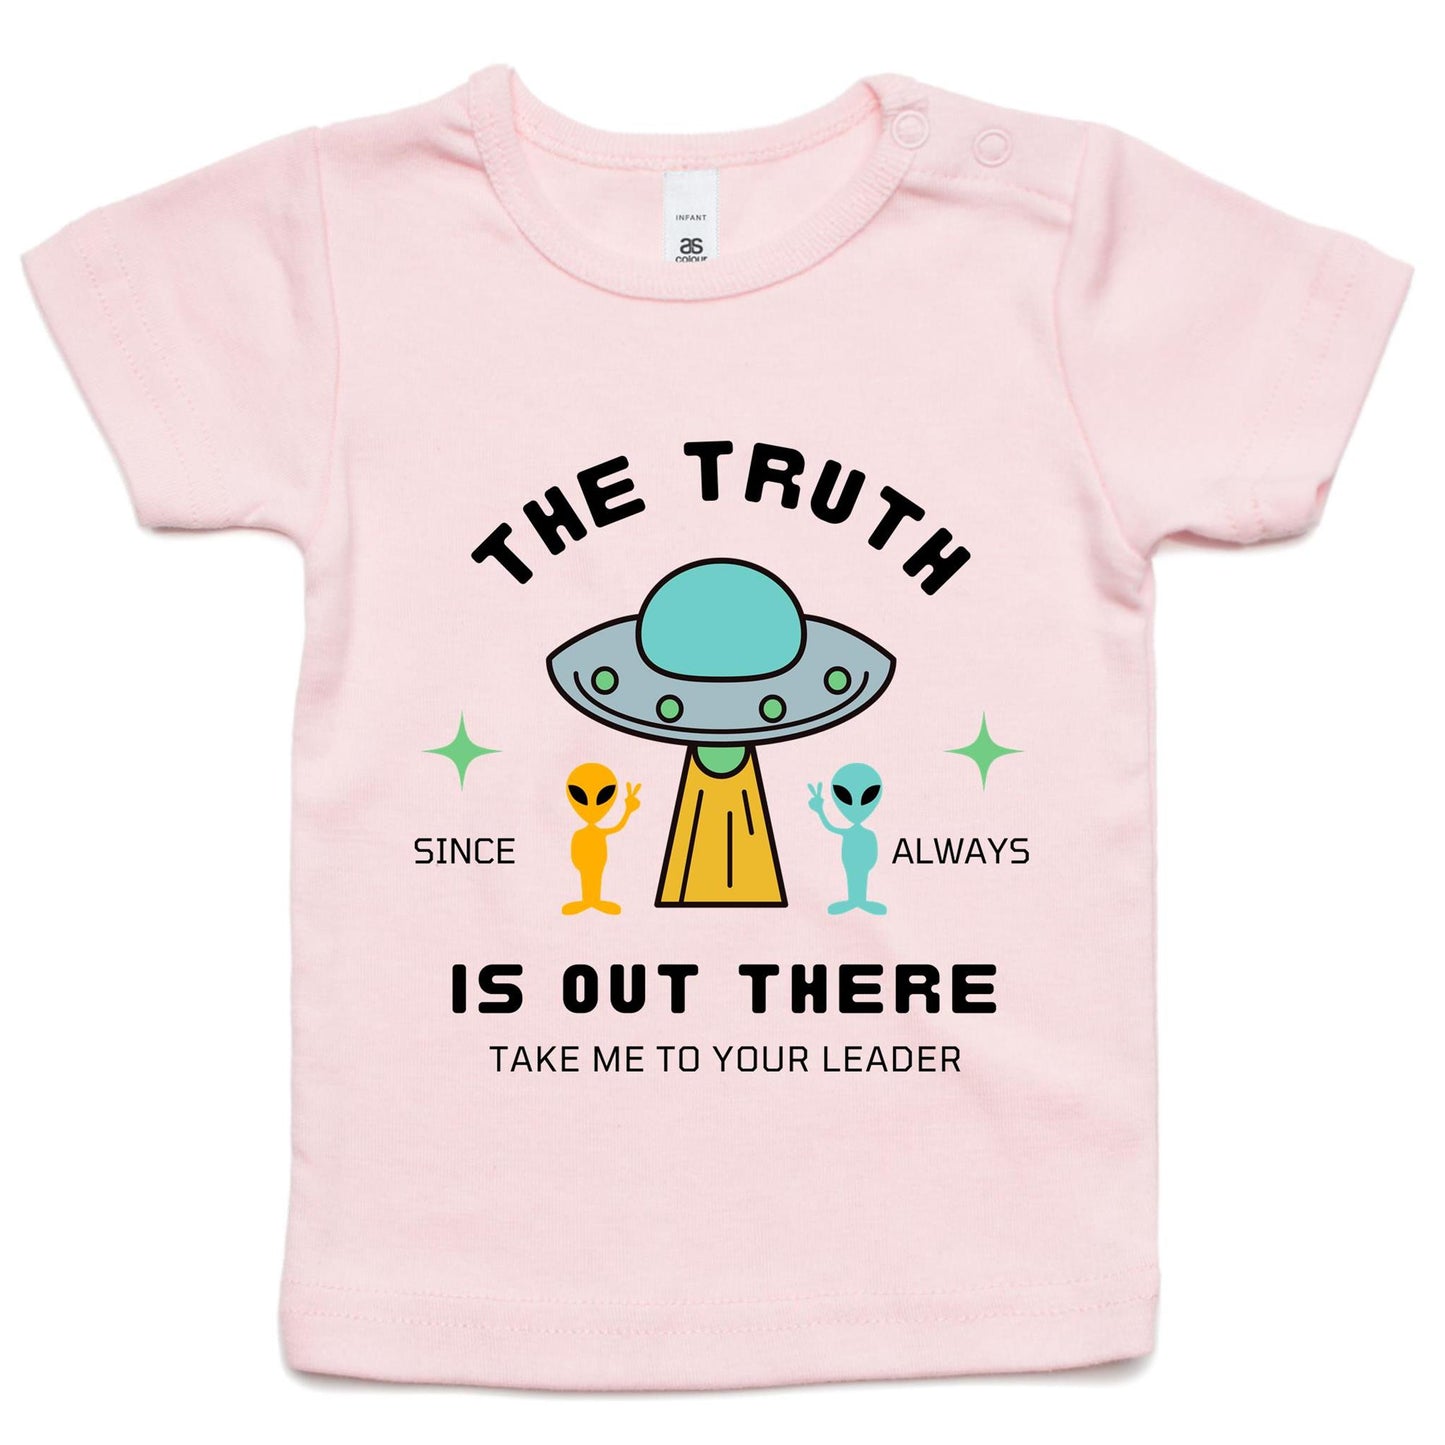 The Truth Is Out There - Baby T-shirt Pink Baby T-shirt Sci Fi